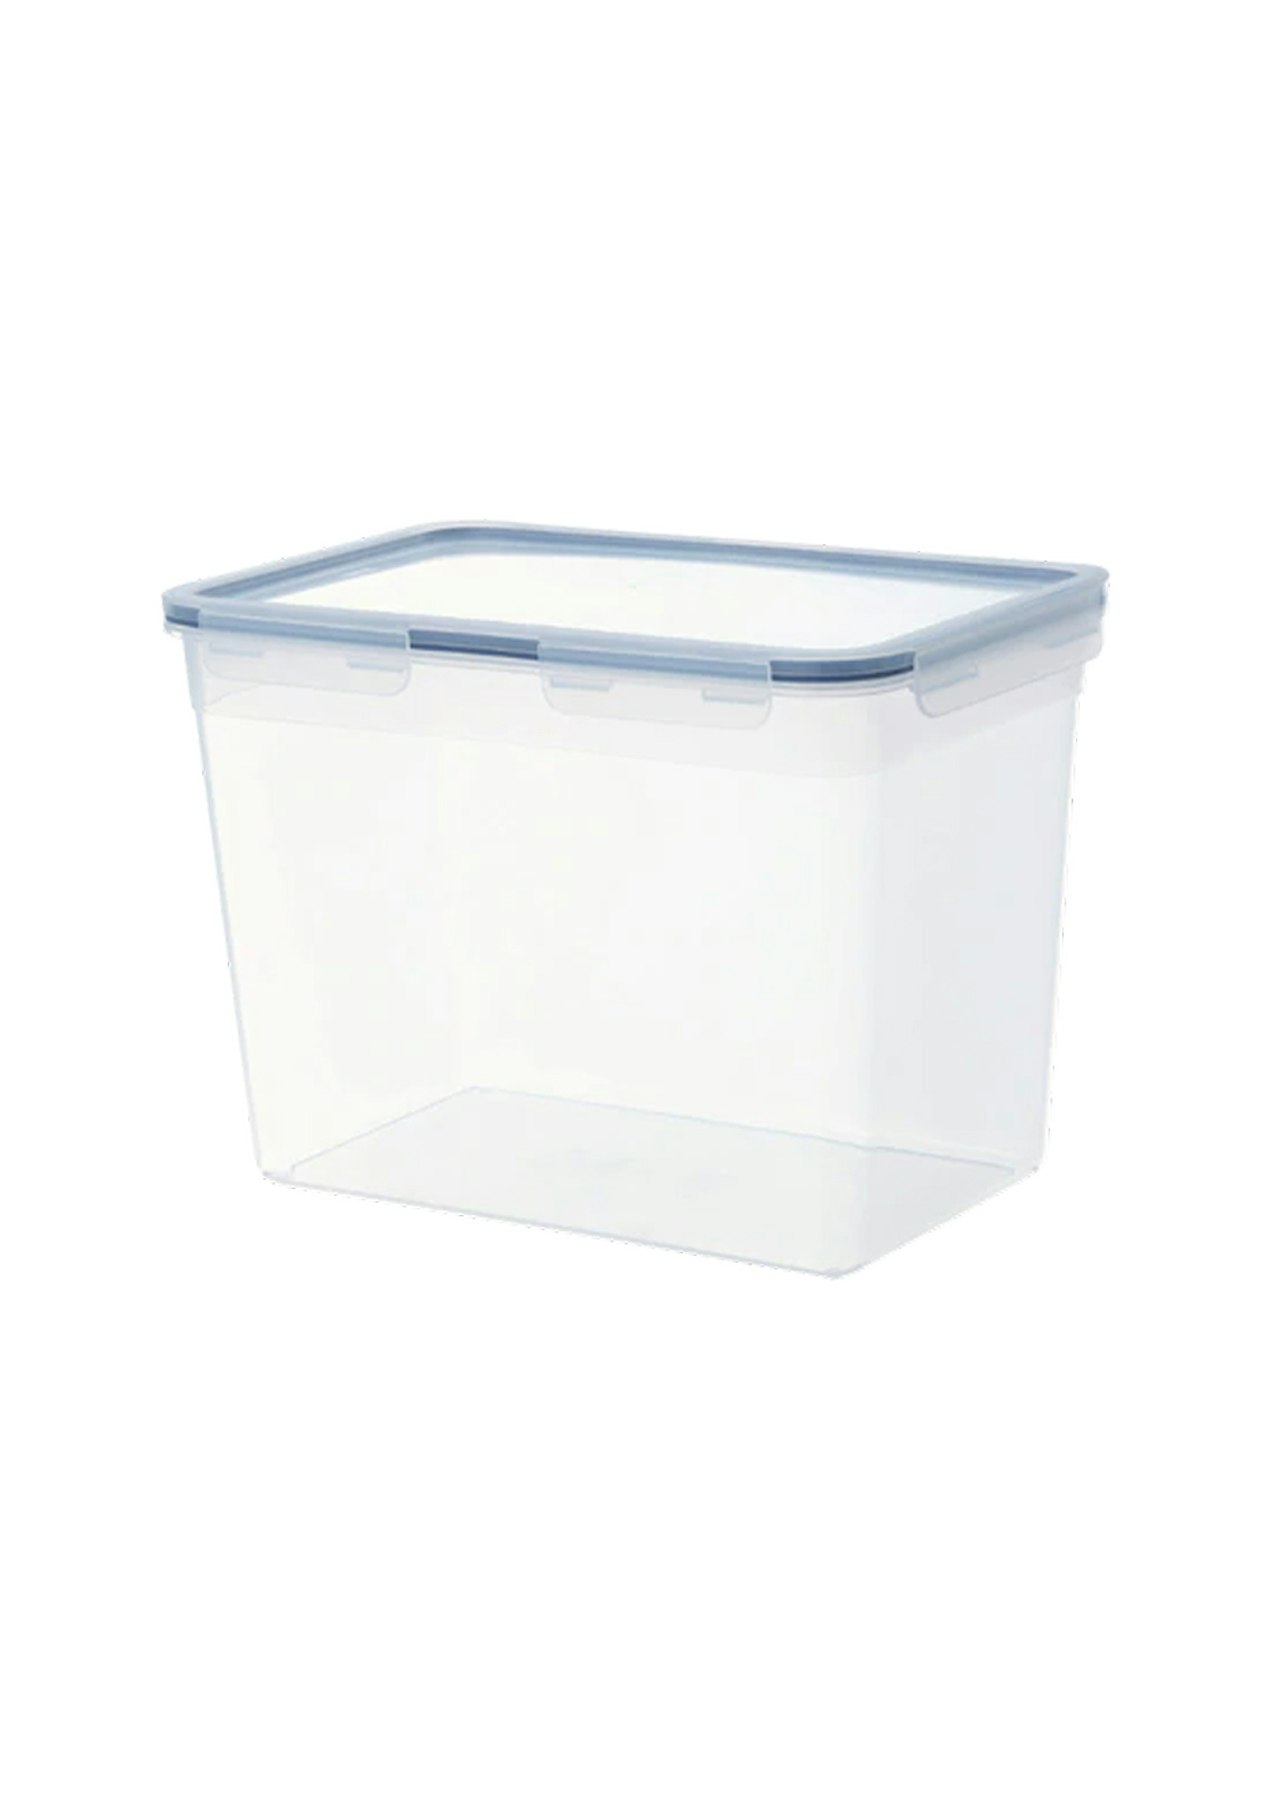 Ikea 365 Food Container With Lid Rectangular Plastic 10 6l 3